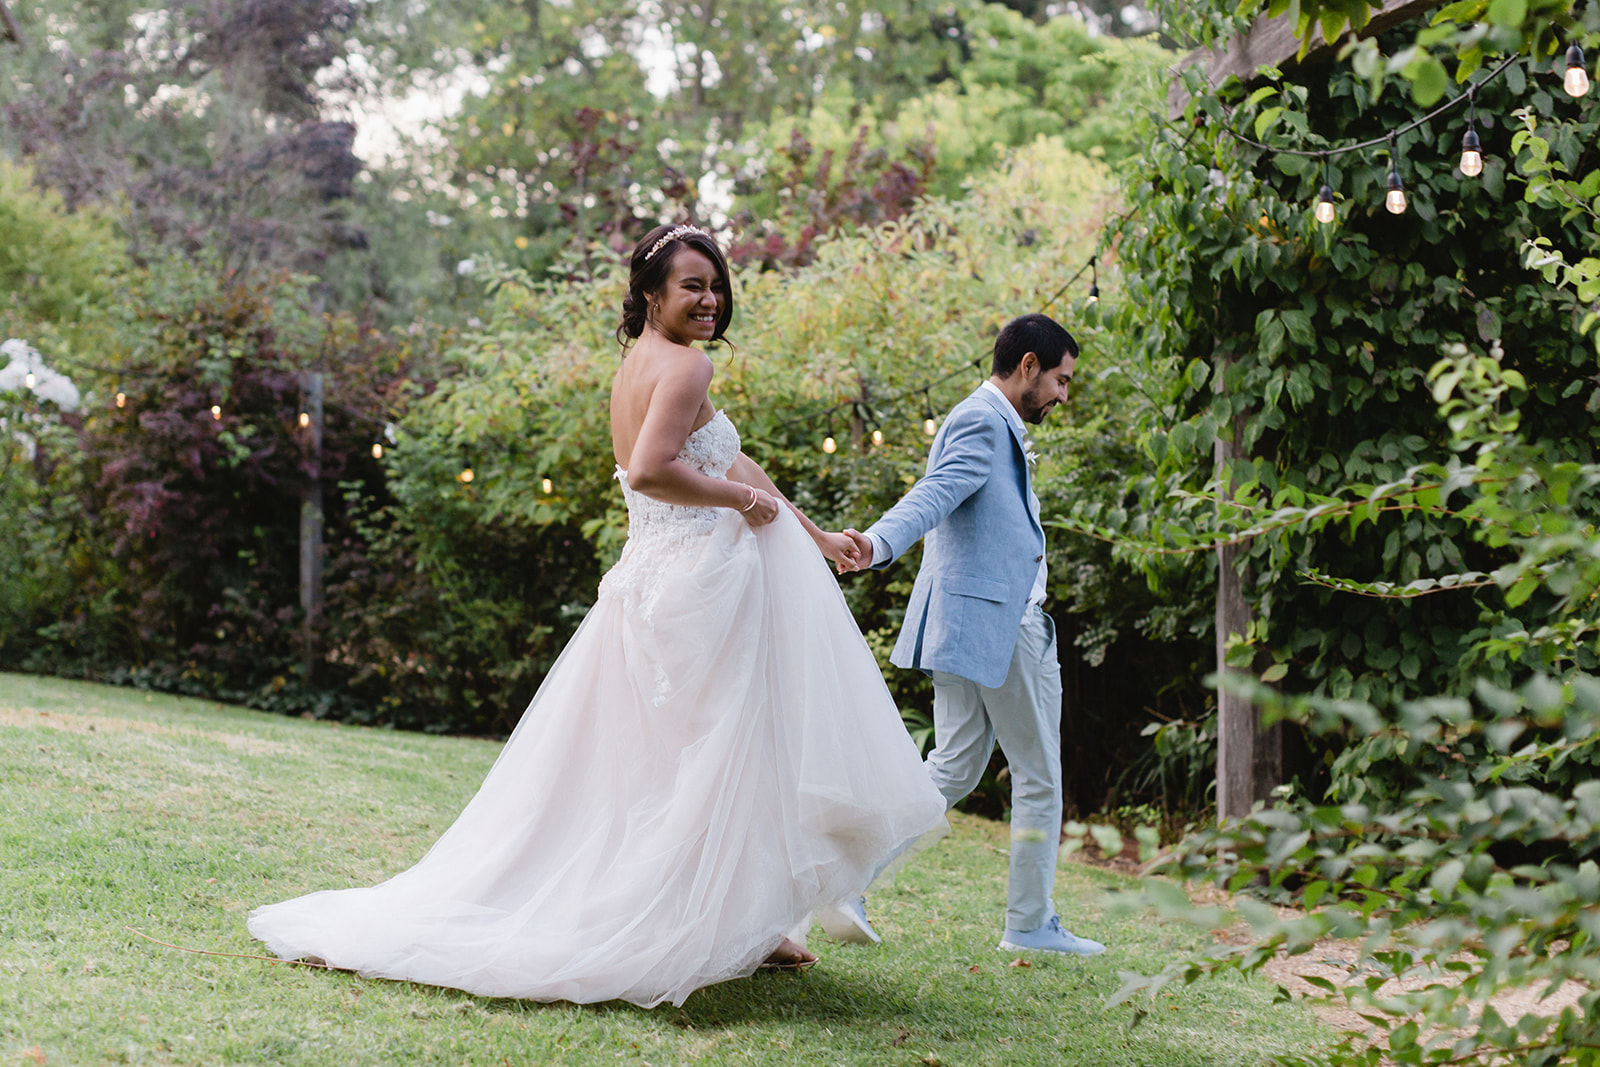 Romantic vintage wedding at Butterfly Red Hill for Evelin and Christian. Photos by Desfura Weddings.